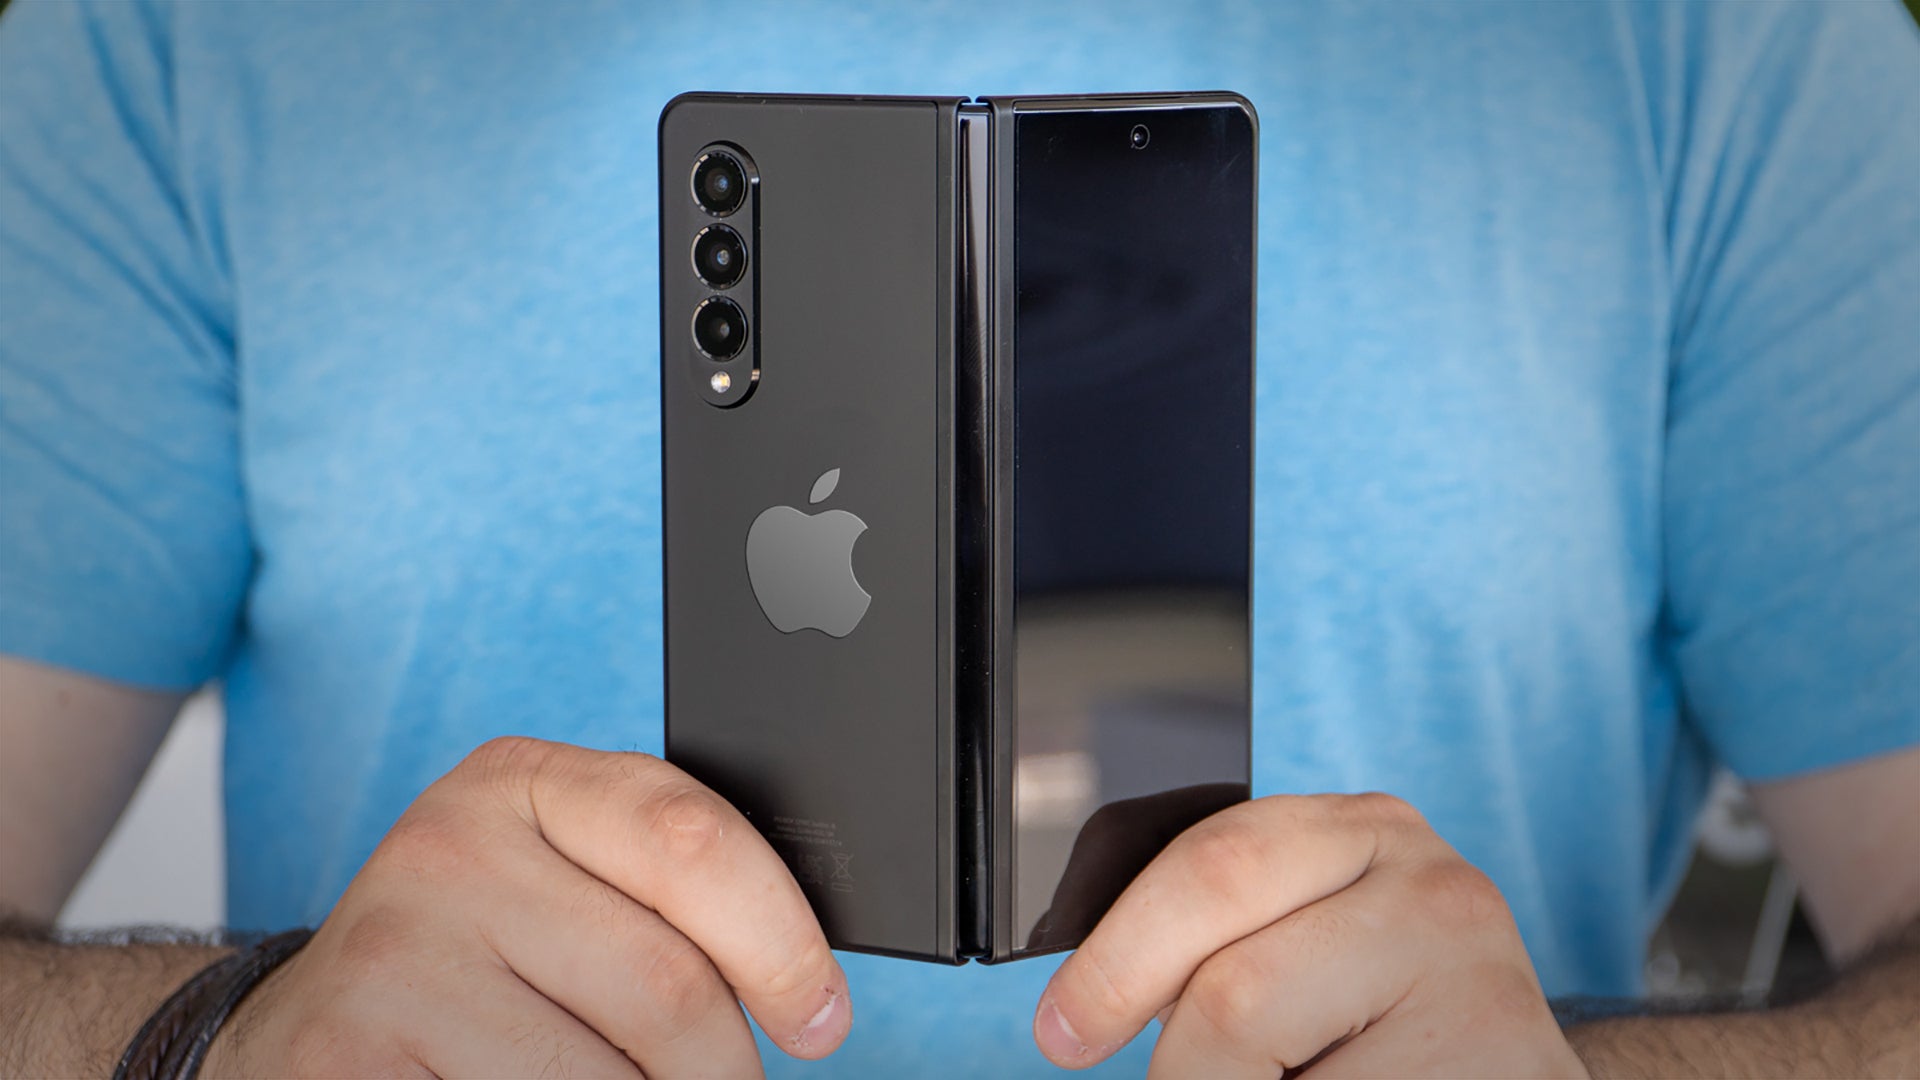 The inevitable iPhone Fold popularity will be all about the logo... and the software - Foldable phones will really take off when Apple makes one